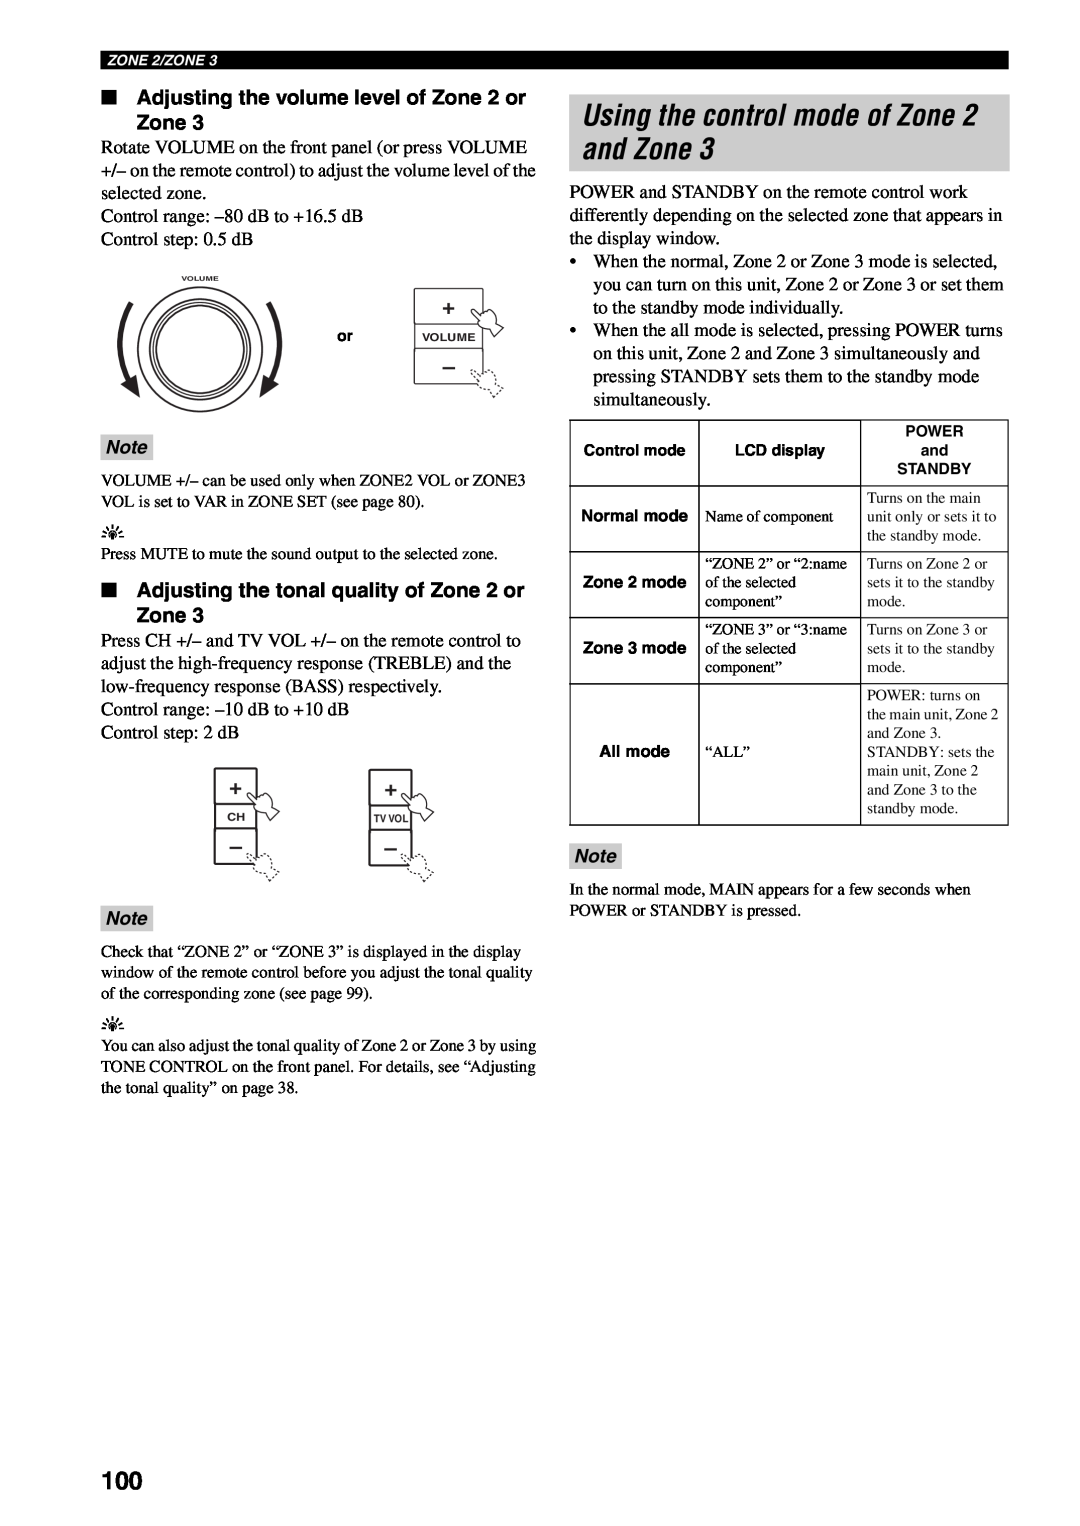 Yamaha RX-V1600 owner manual Using the control mode of Zone 2 and Zone, Adjusting the volume level of Zone 2 or Zone 